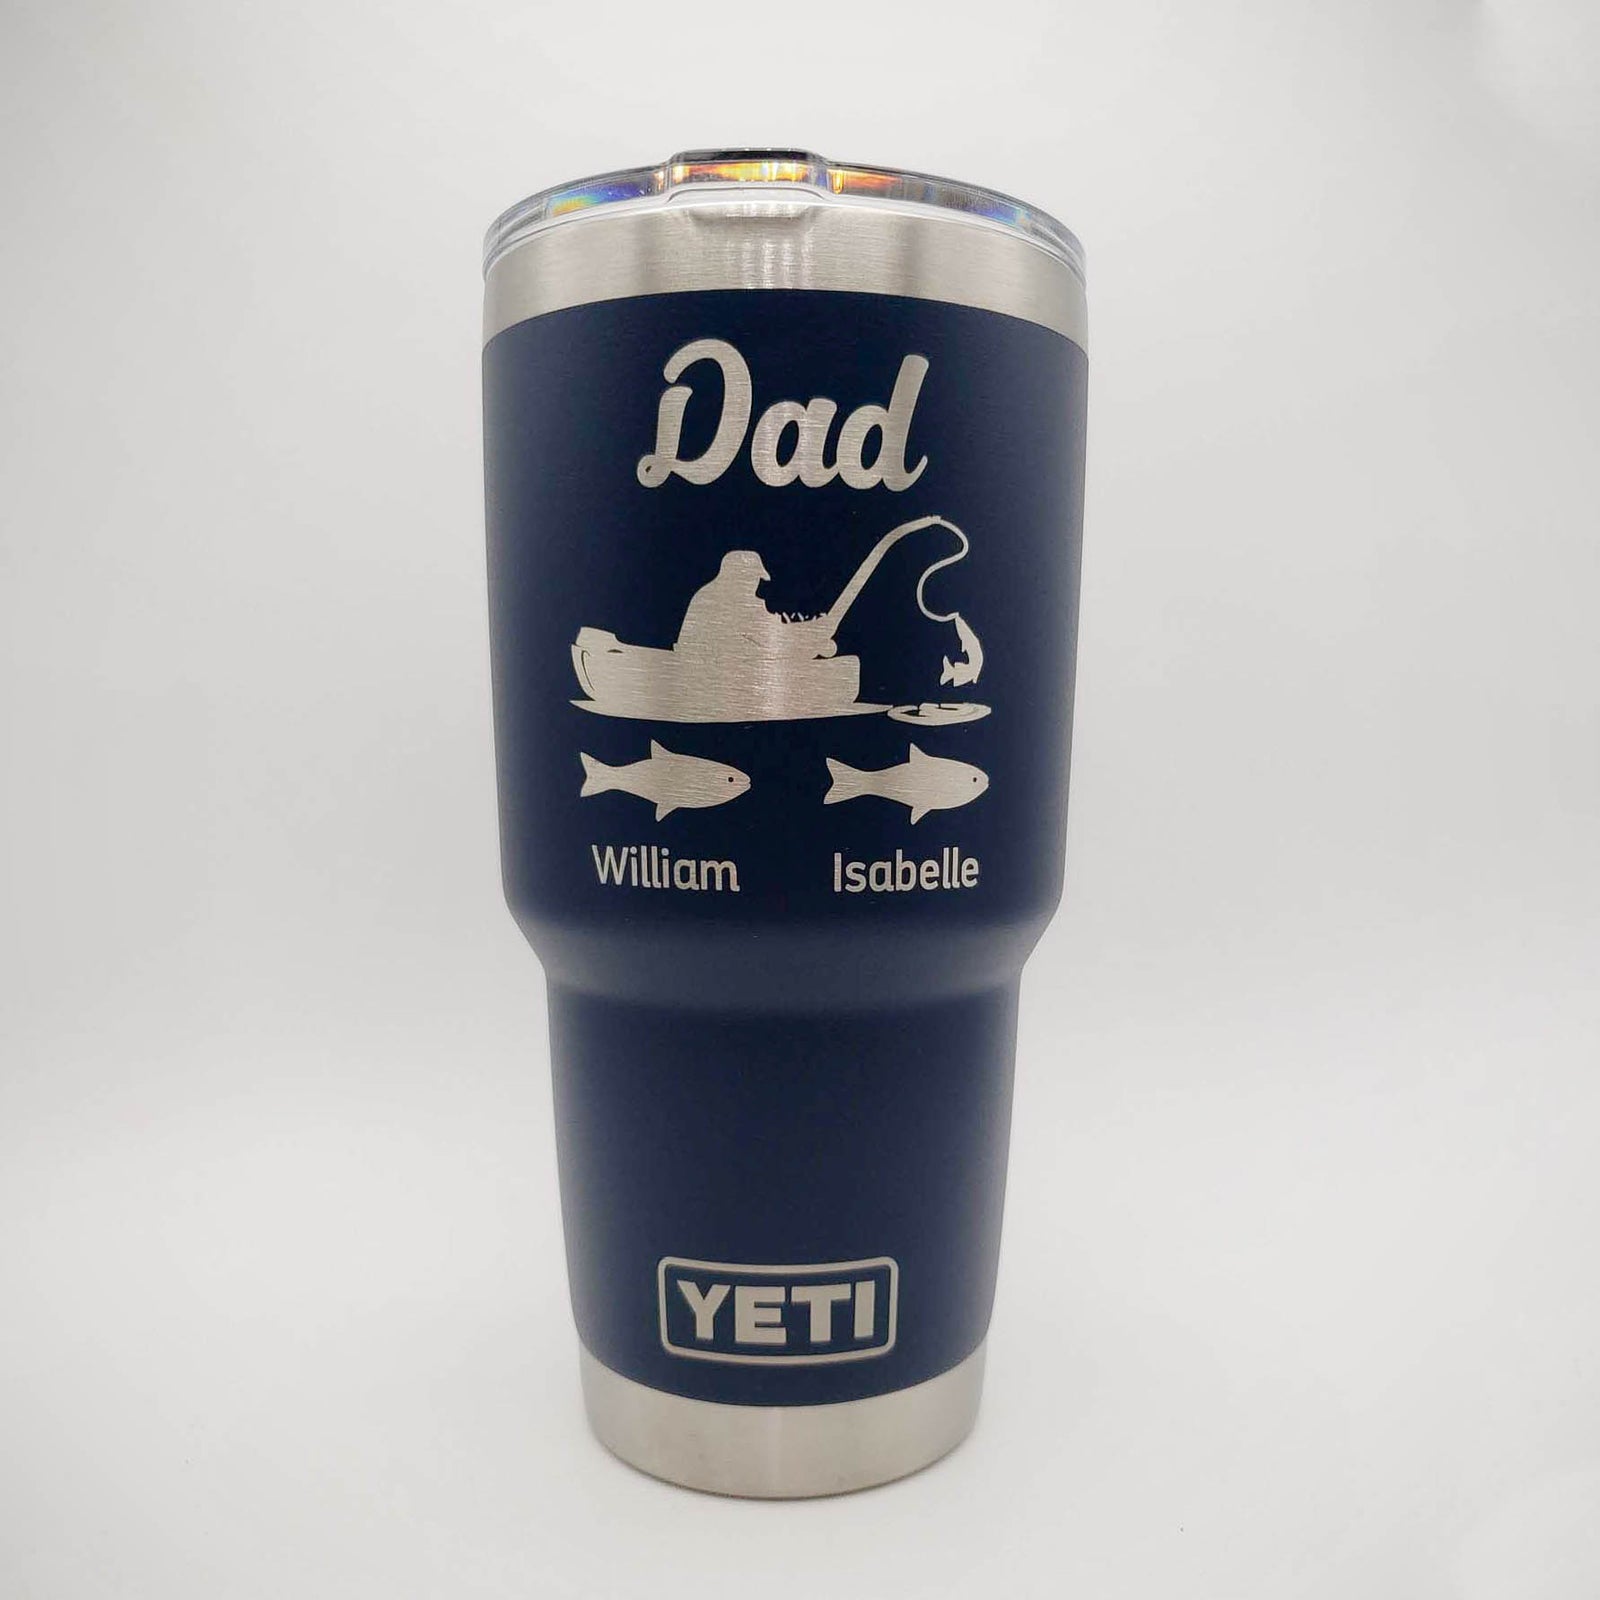 Custom YETI Drinkware & Coolers - Personalize with a logo